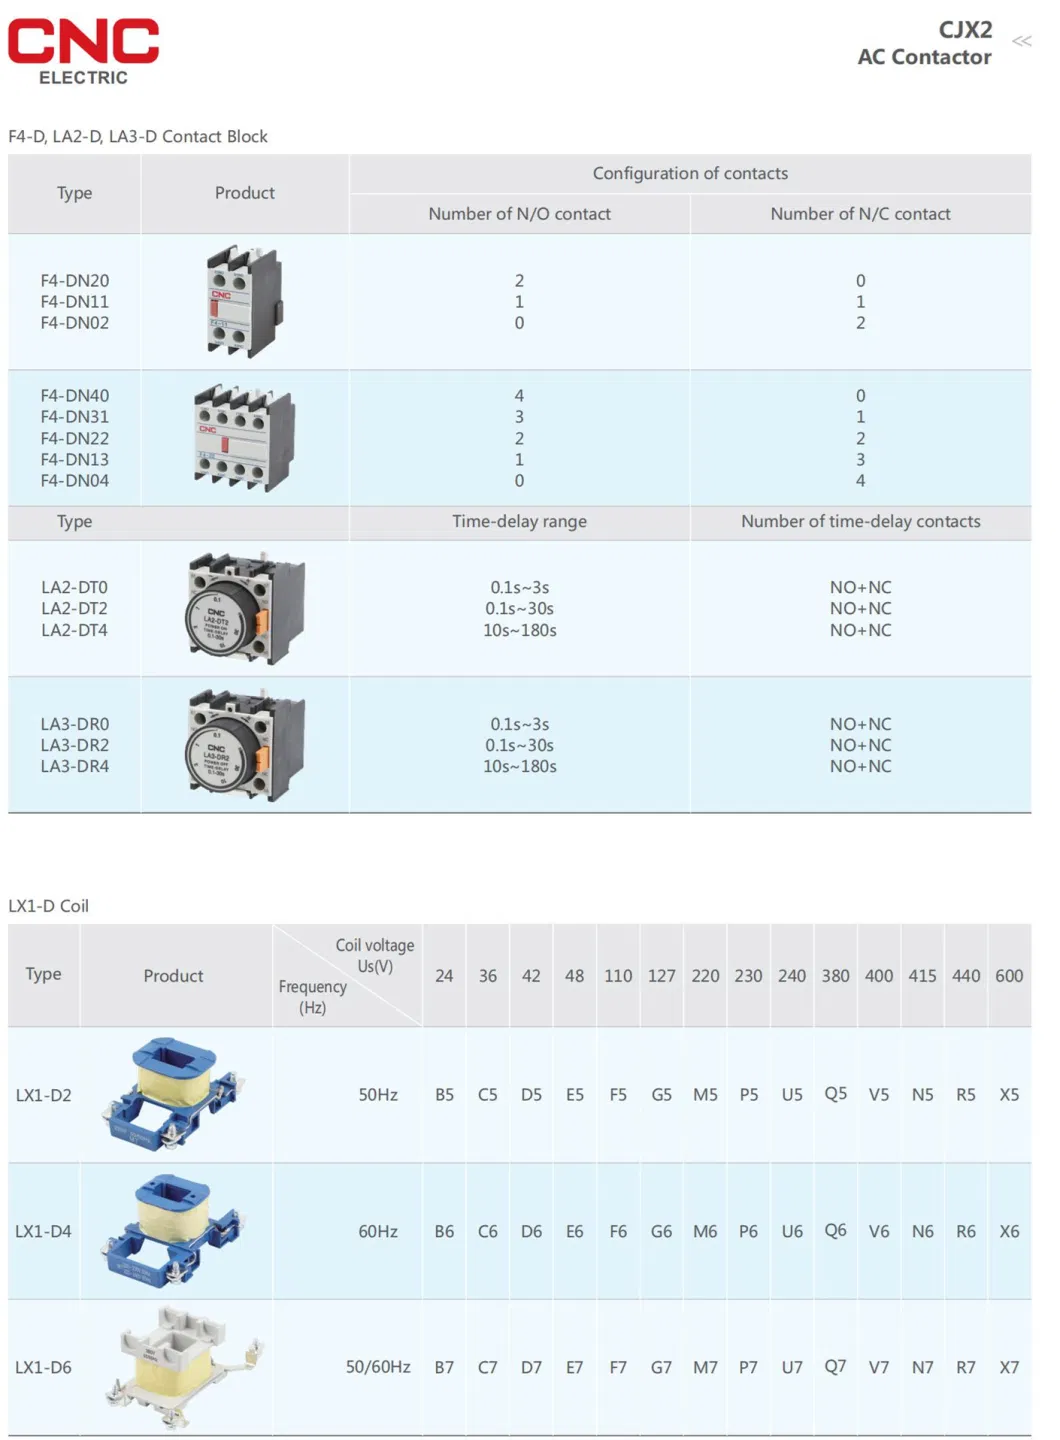 CNC OEM New Products 20A Contactor 20 AMP Contactor 18A Magnetic Contactor